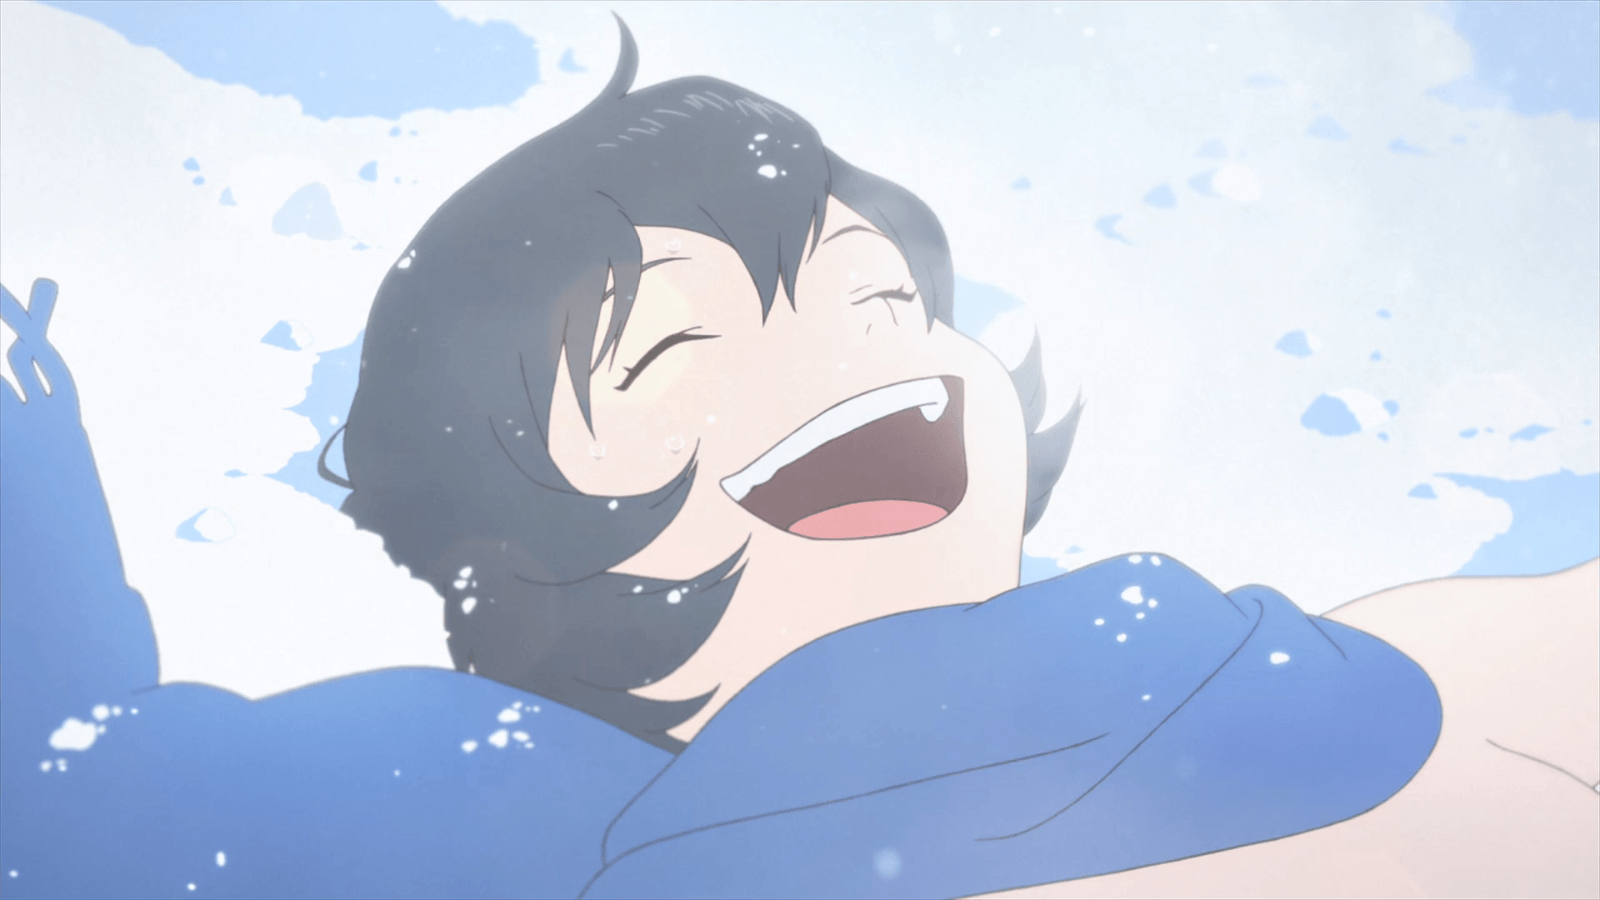 Ame smiling on snow Wolf Children Wallpaper and Background